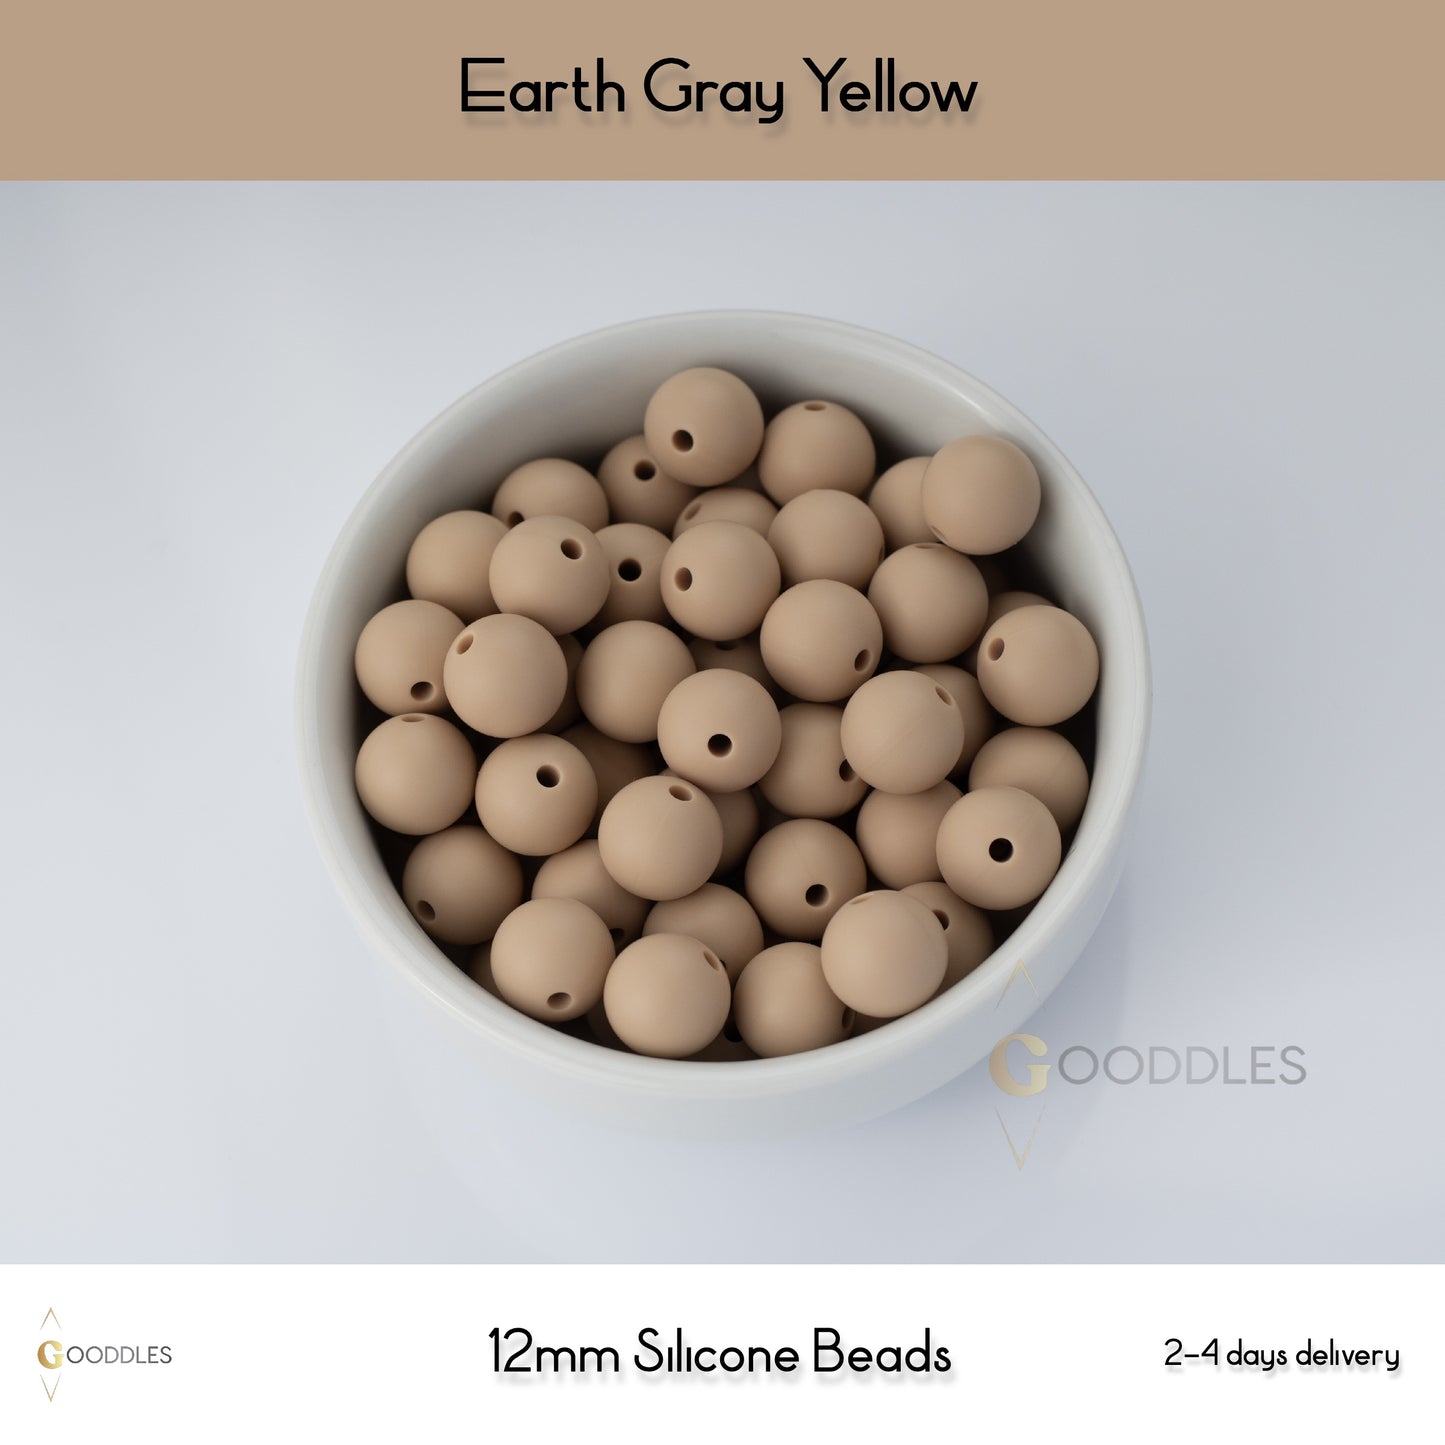 5pcs, Earth Gray Yellow Silicone Beads Round Silicone Beads